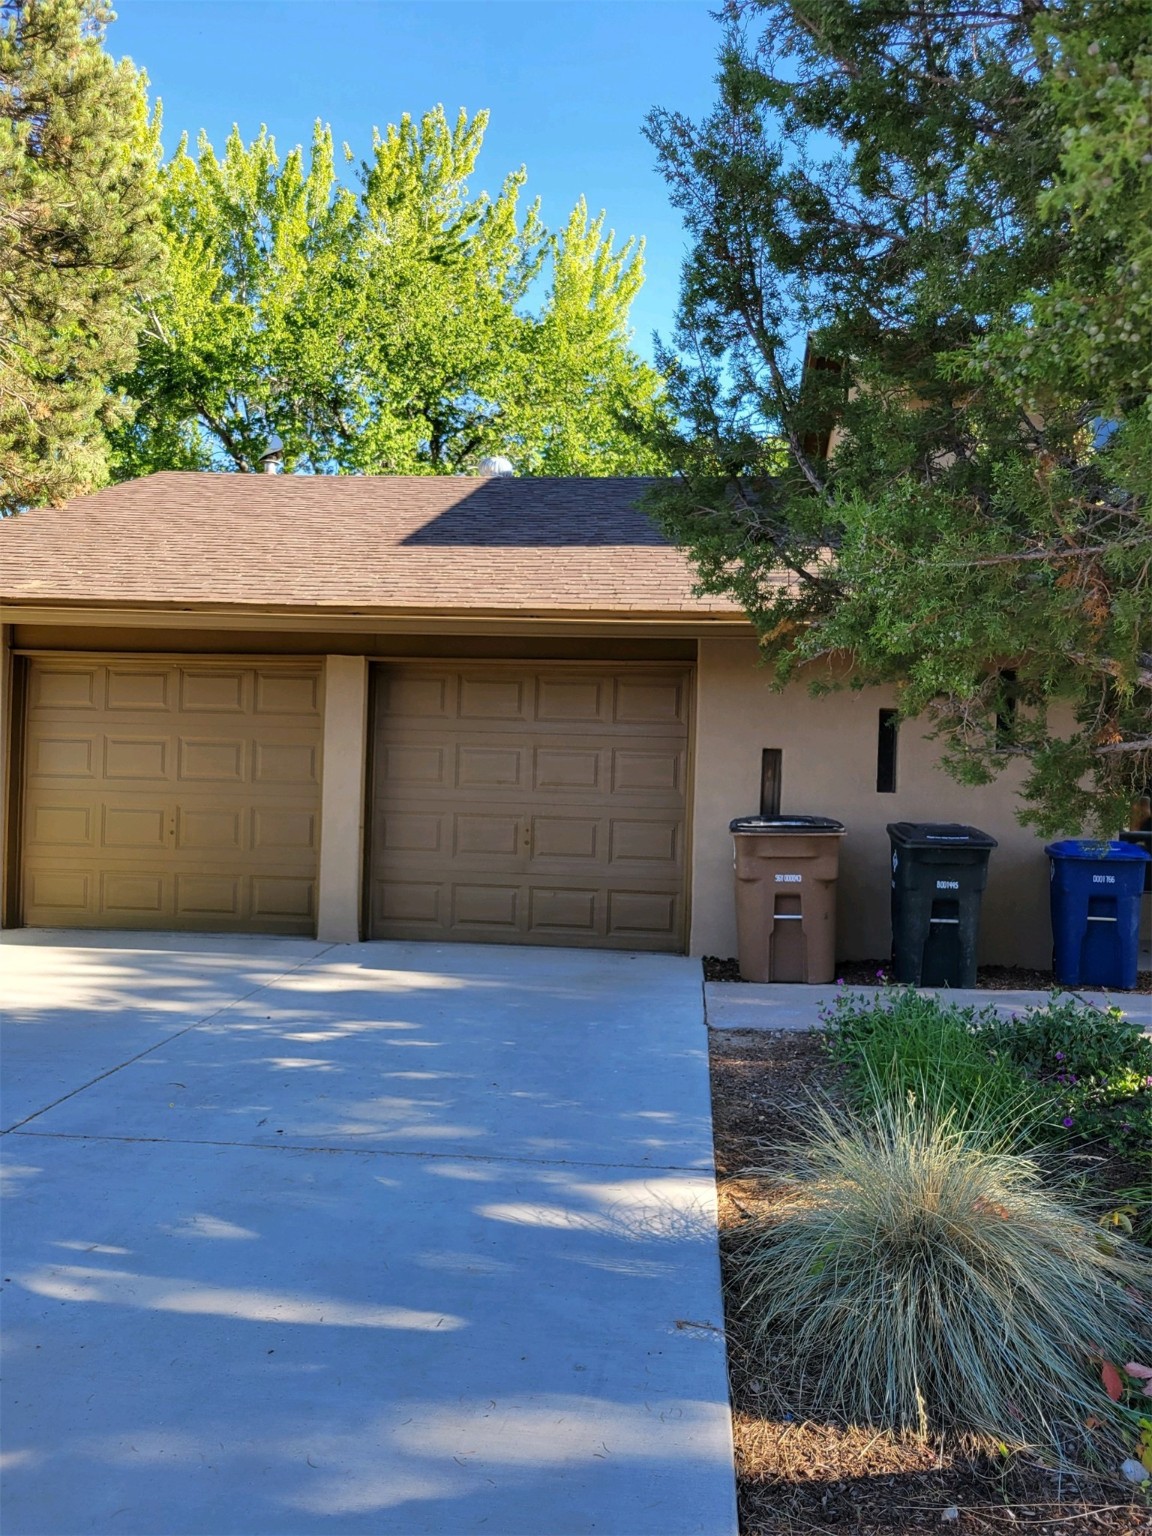 455 Bryce Ave, Los Alamos, New Mexico 87547, 5 Bedrooms Bedrooms, ,3 BathroomsBathrooms,Residential,For Sale,455 Bryce Ave,202232769